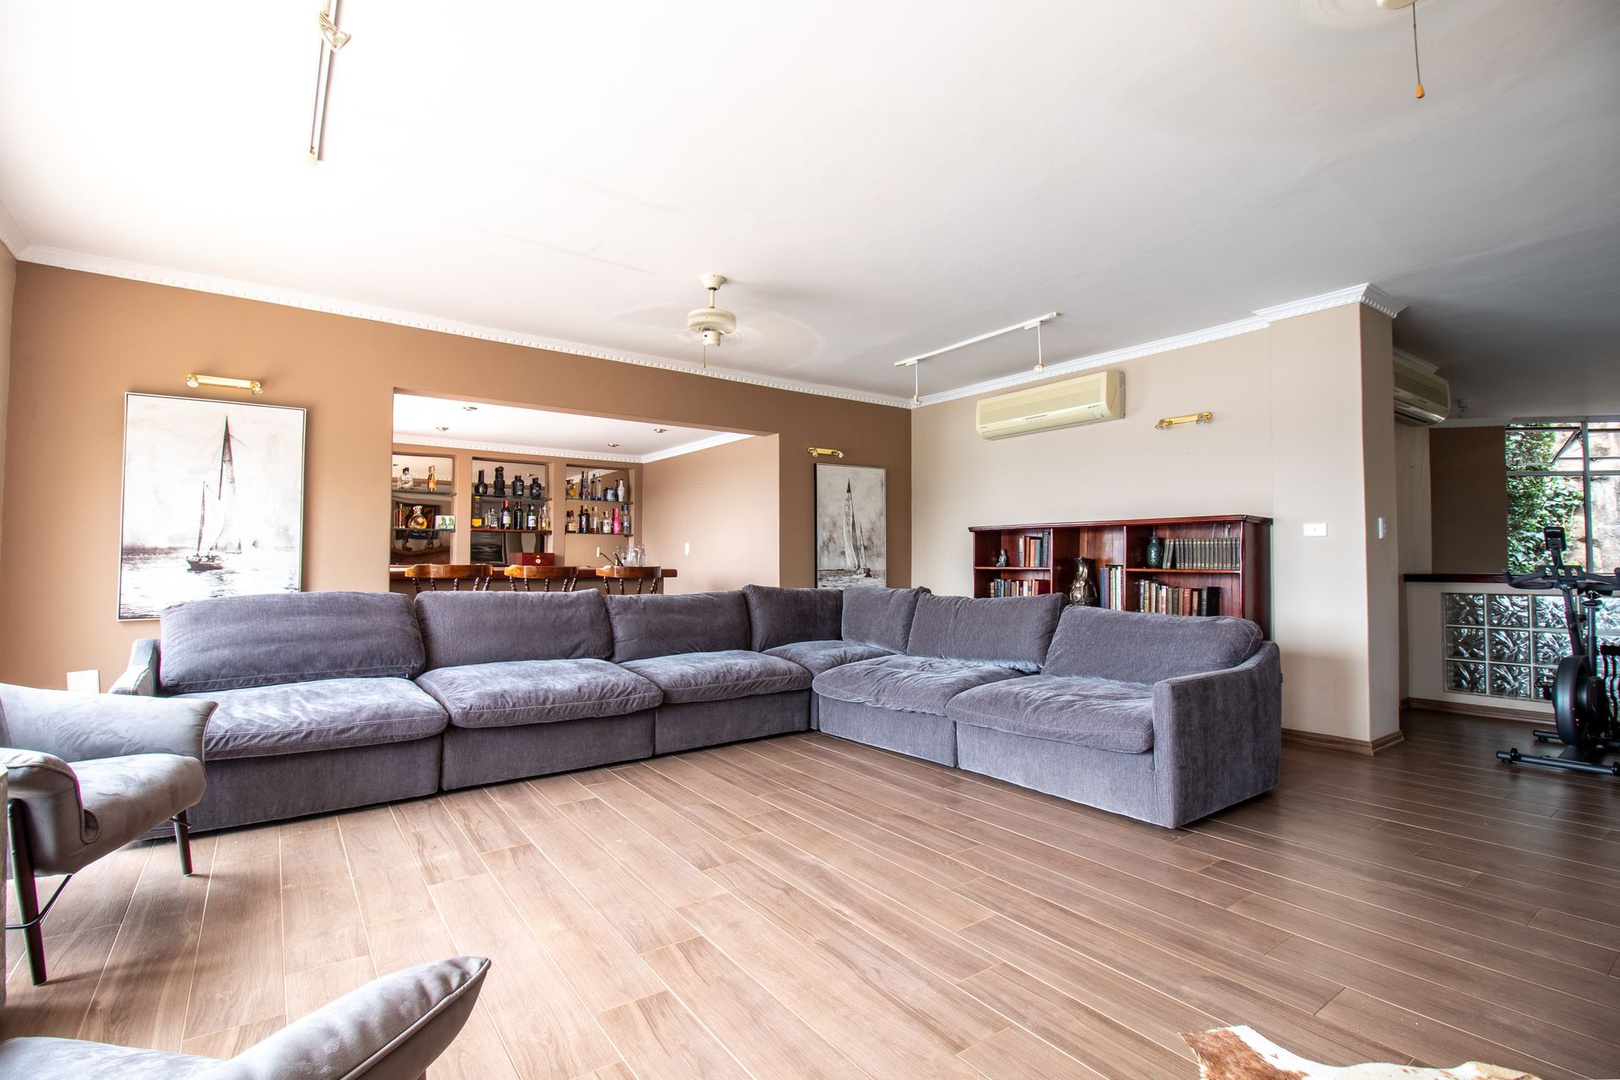 House in Kosmos - No shortage of space for entertaining friends and family!